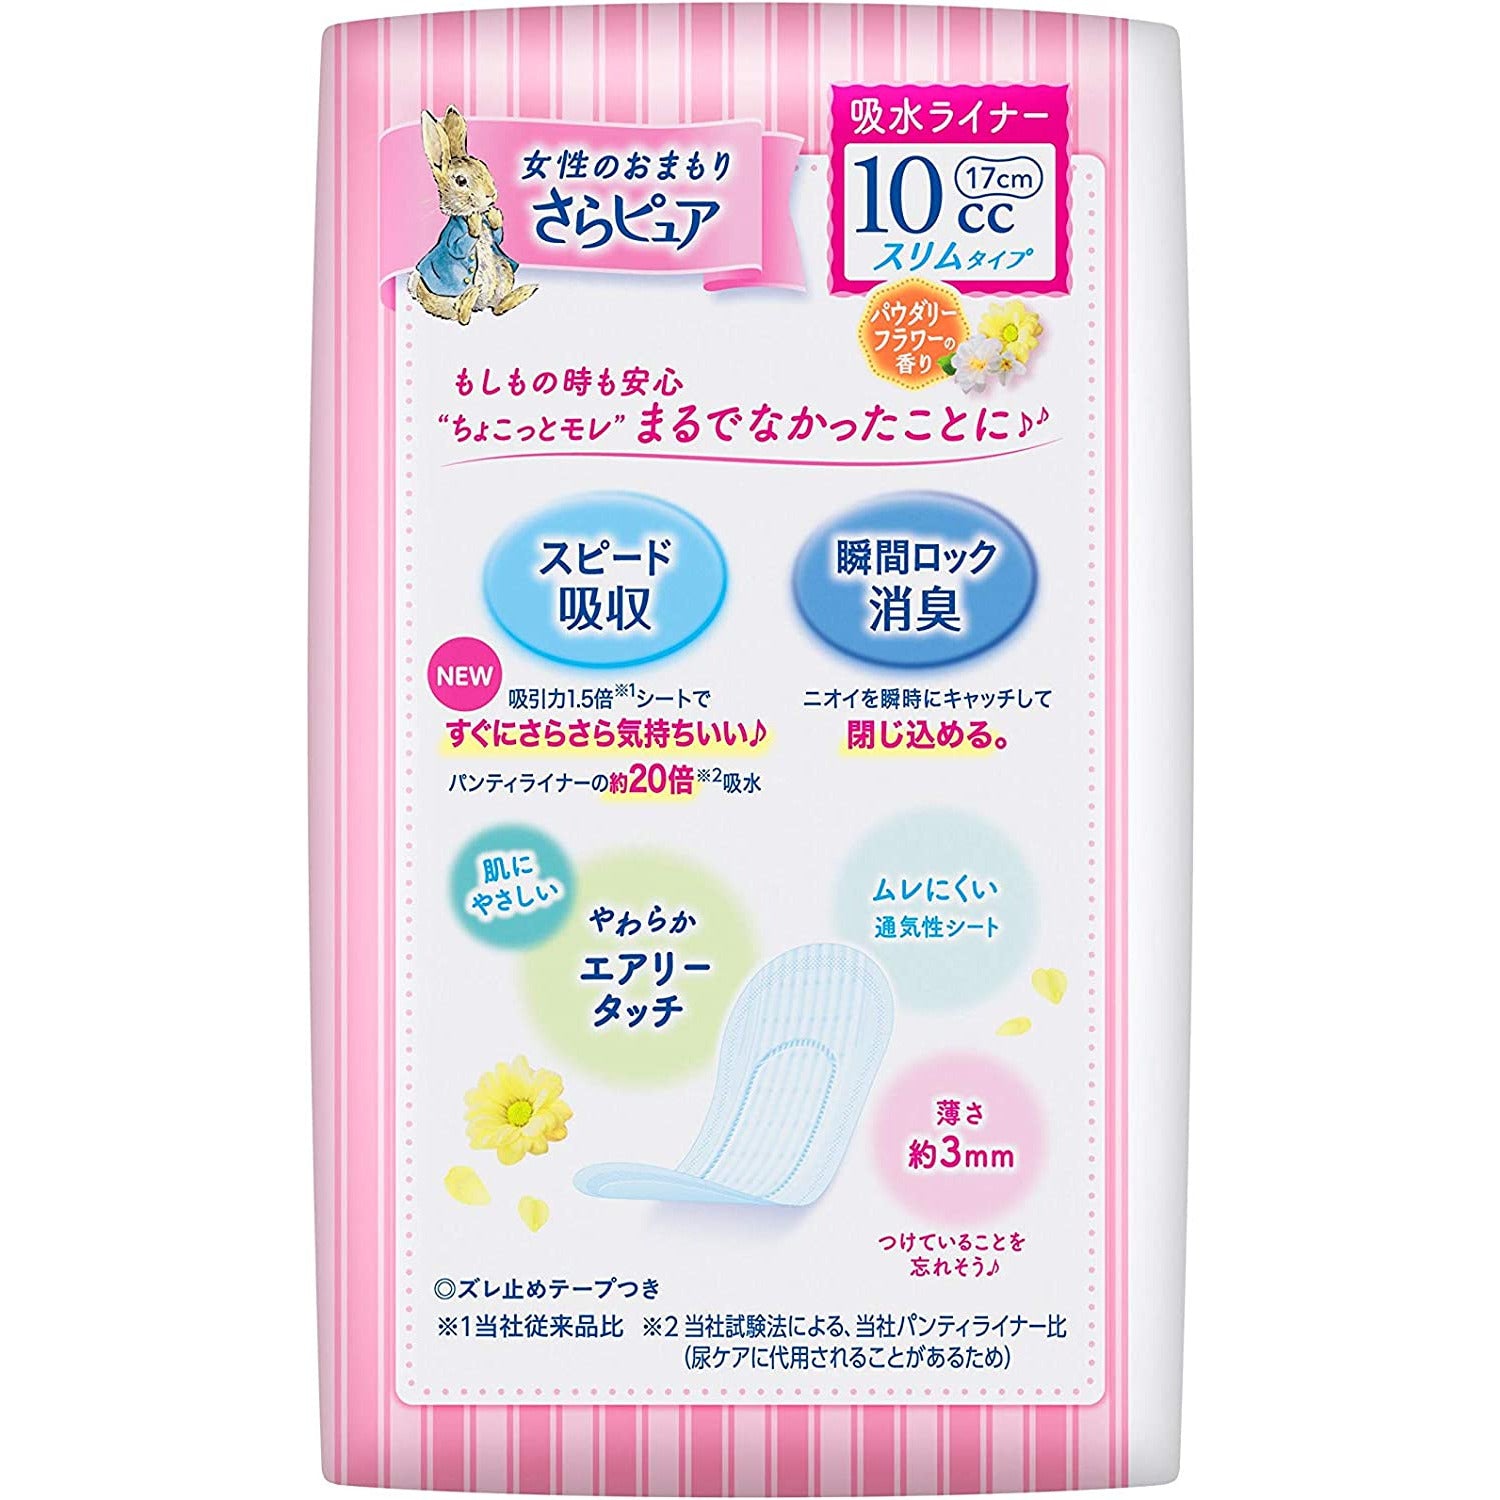 Kao Laurier Sara Pure water absorption liner slim type 10cc powdery flower scent 40 sheets